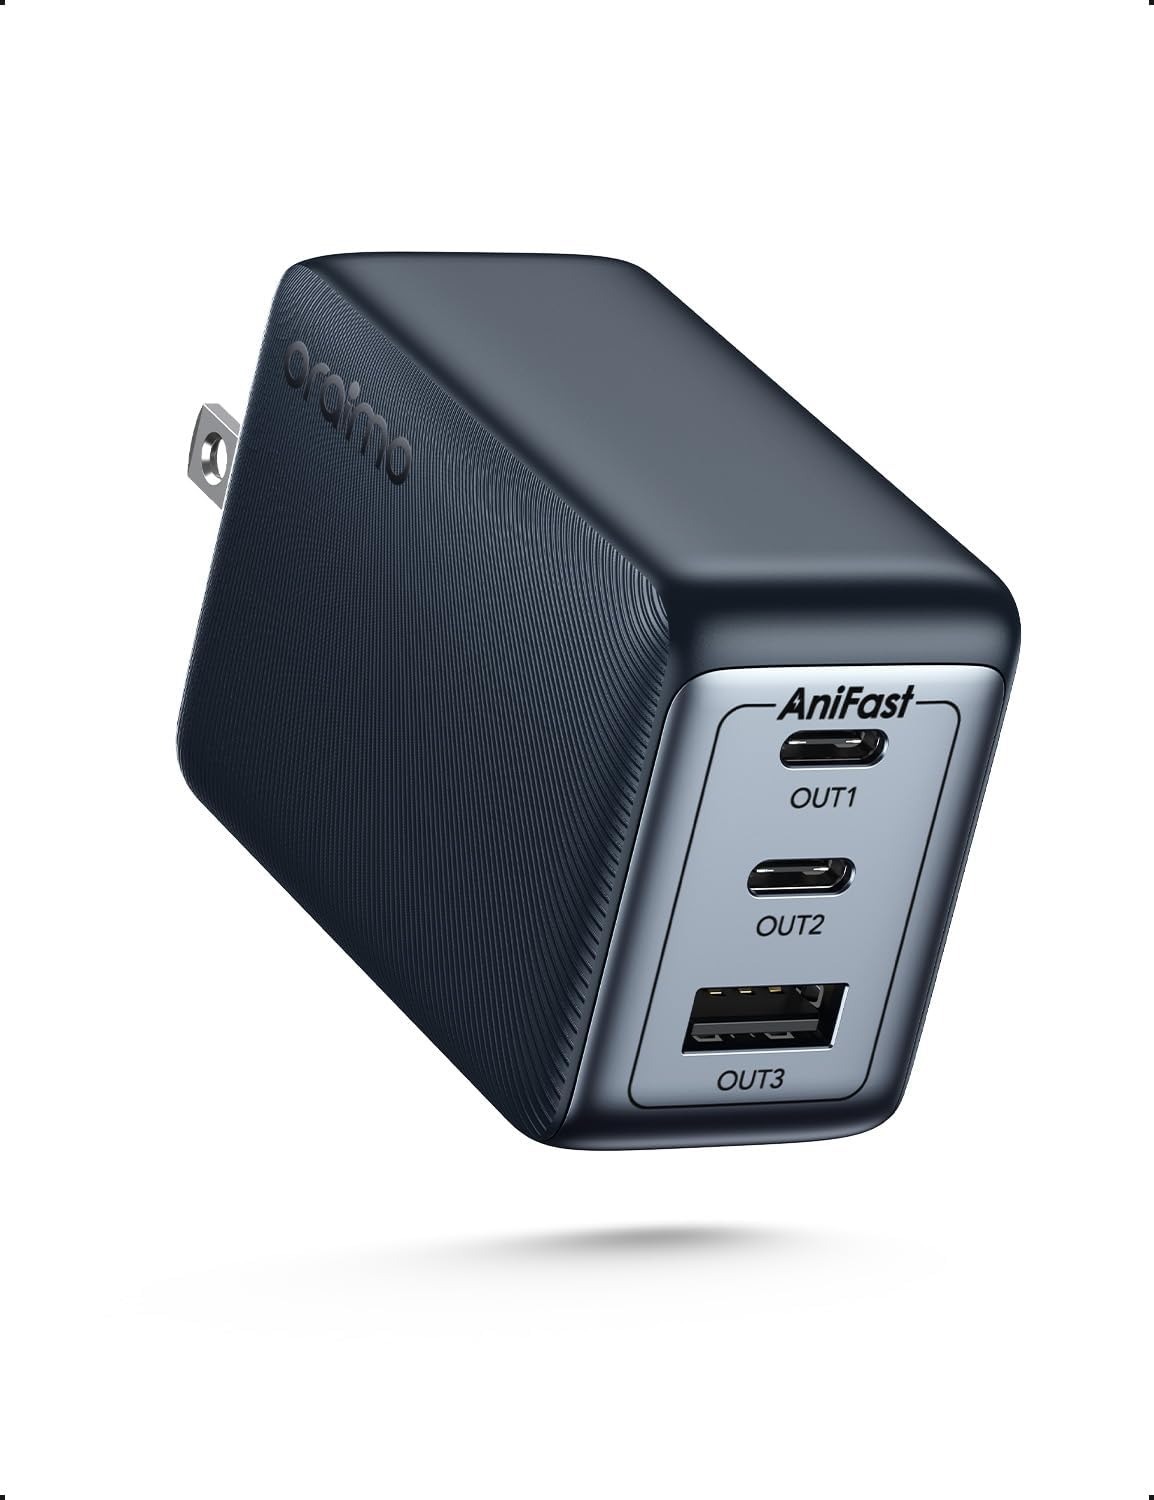 Oraimo 65W 3-Port USB C Compact GaN Charger w/ PPS Super Fast Charging $12 + Free Shipping w/ Prime or orders $35+